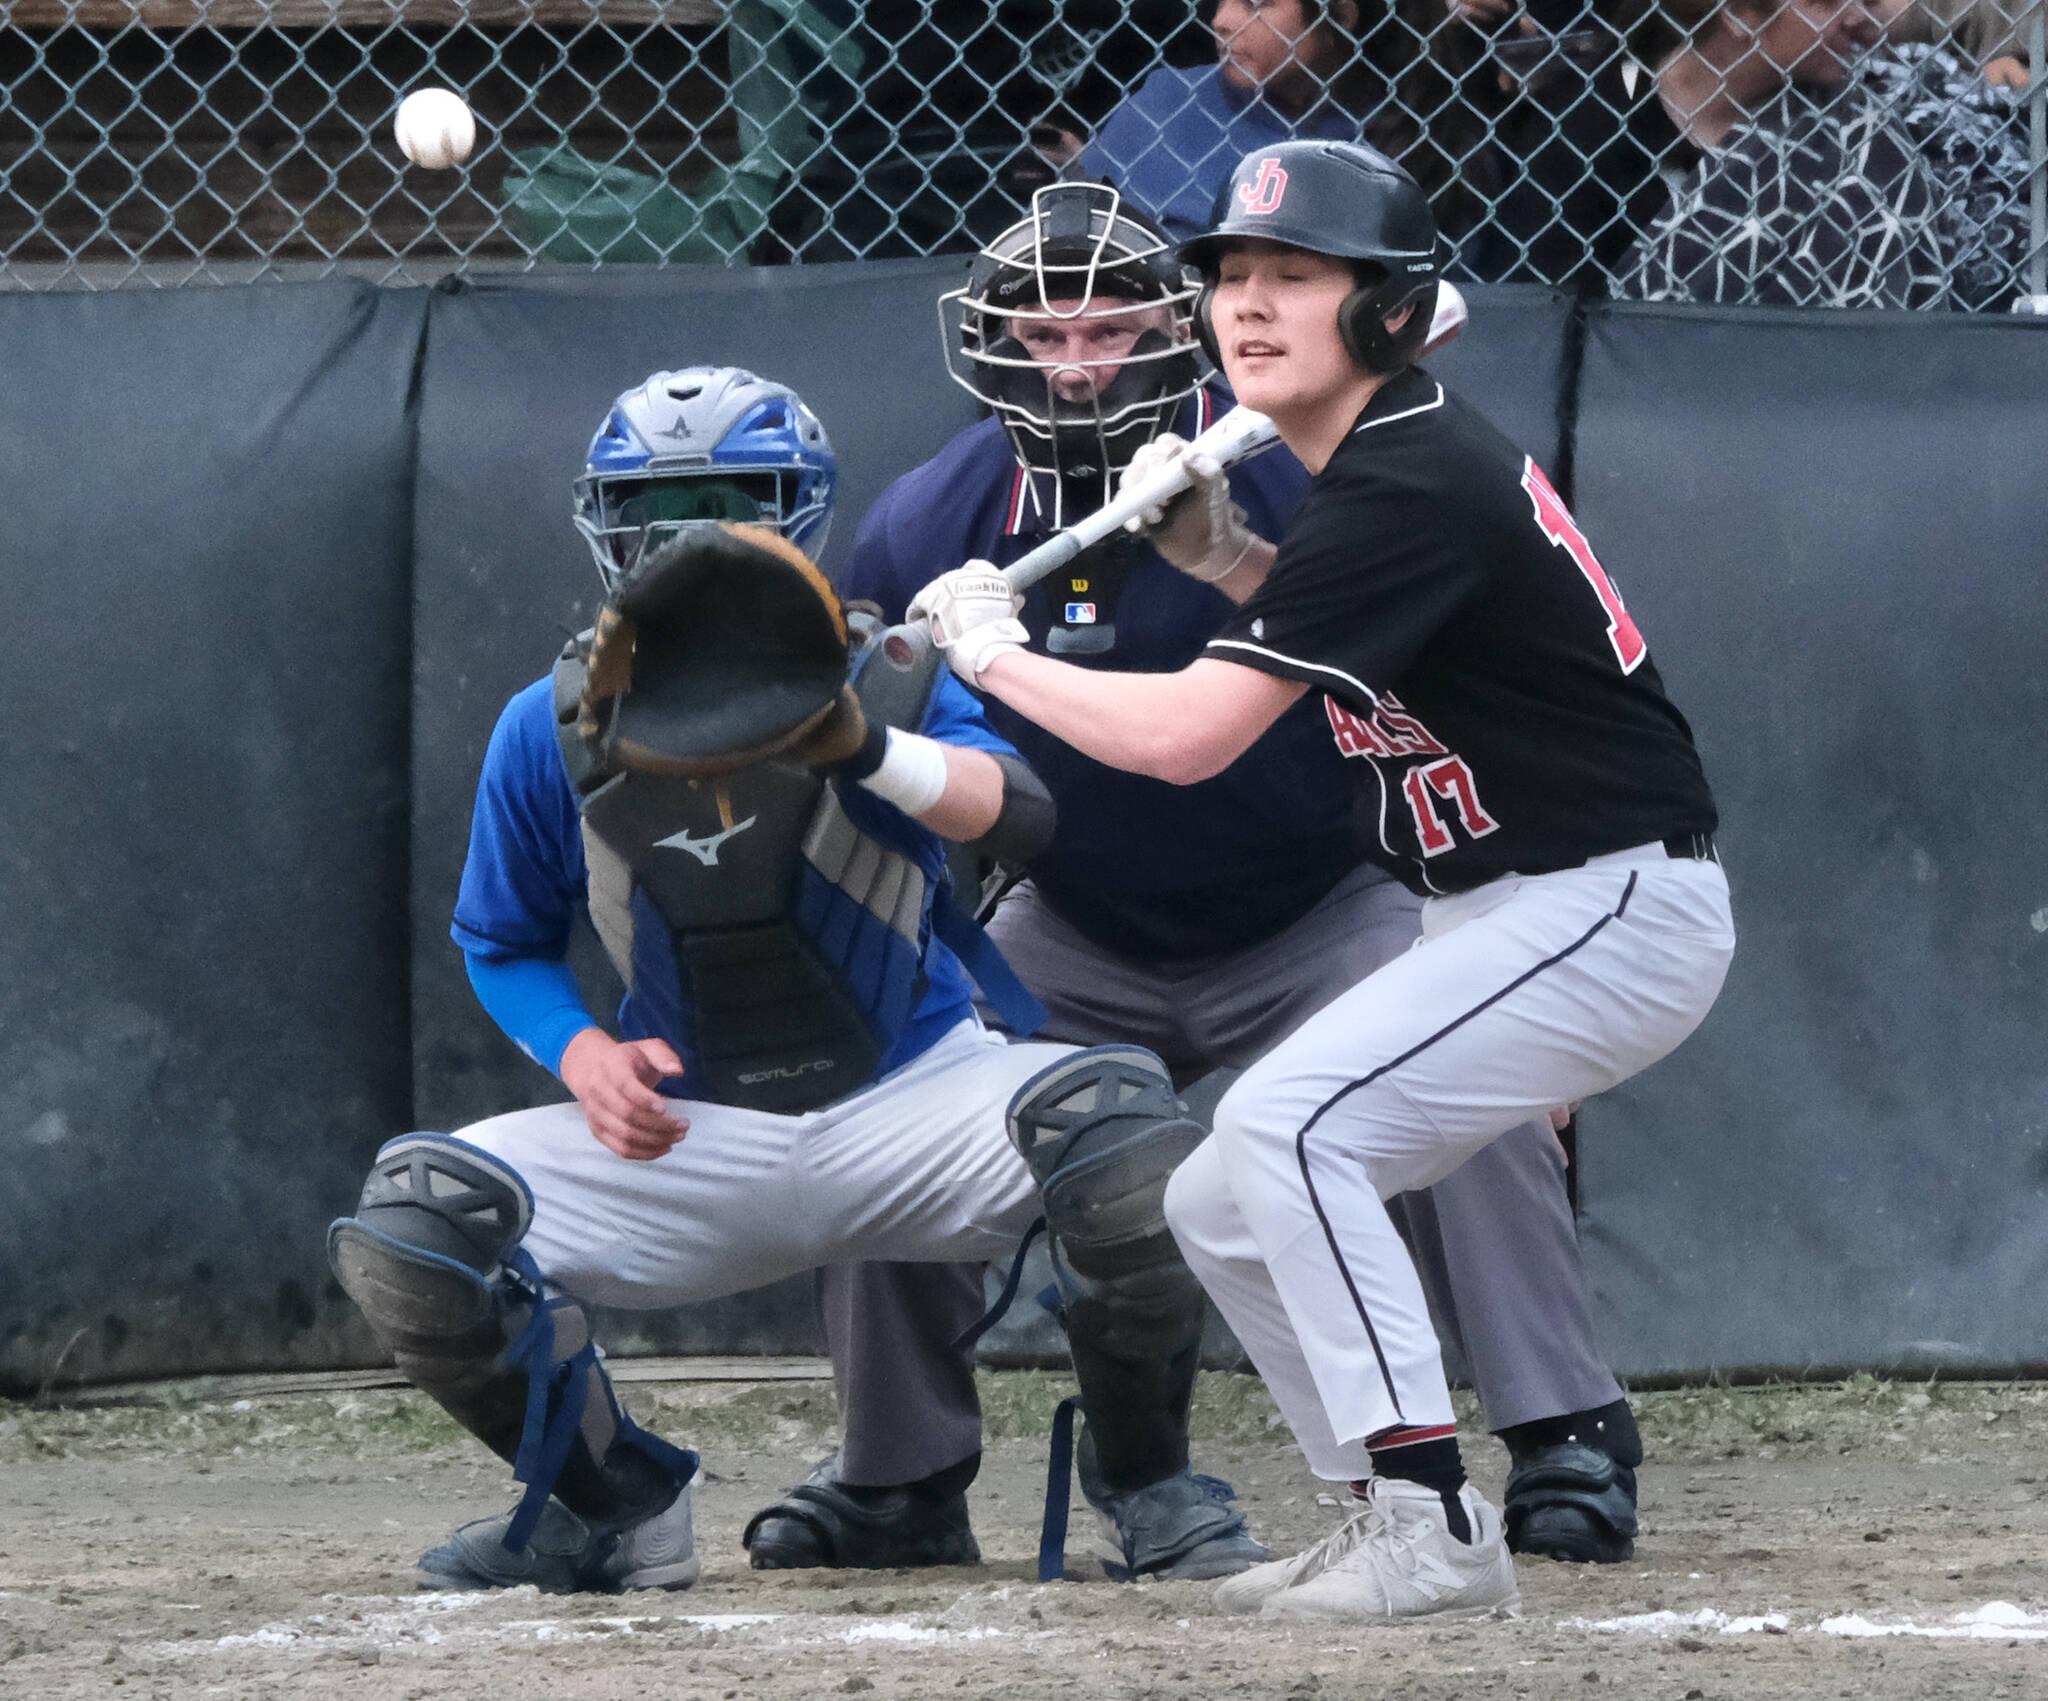 TMHS catcher Rory Hayes and umpire Tom Mayer wait for a pitch as JDHS batter Christian Nelson pulls back from a bunt during the Falcons 9-6 win over the Crimson Bears on Tuesday at Adair Kennedy Field. (Klas Stolpe / Juneau Empire)